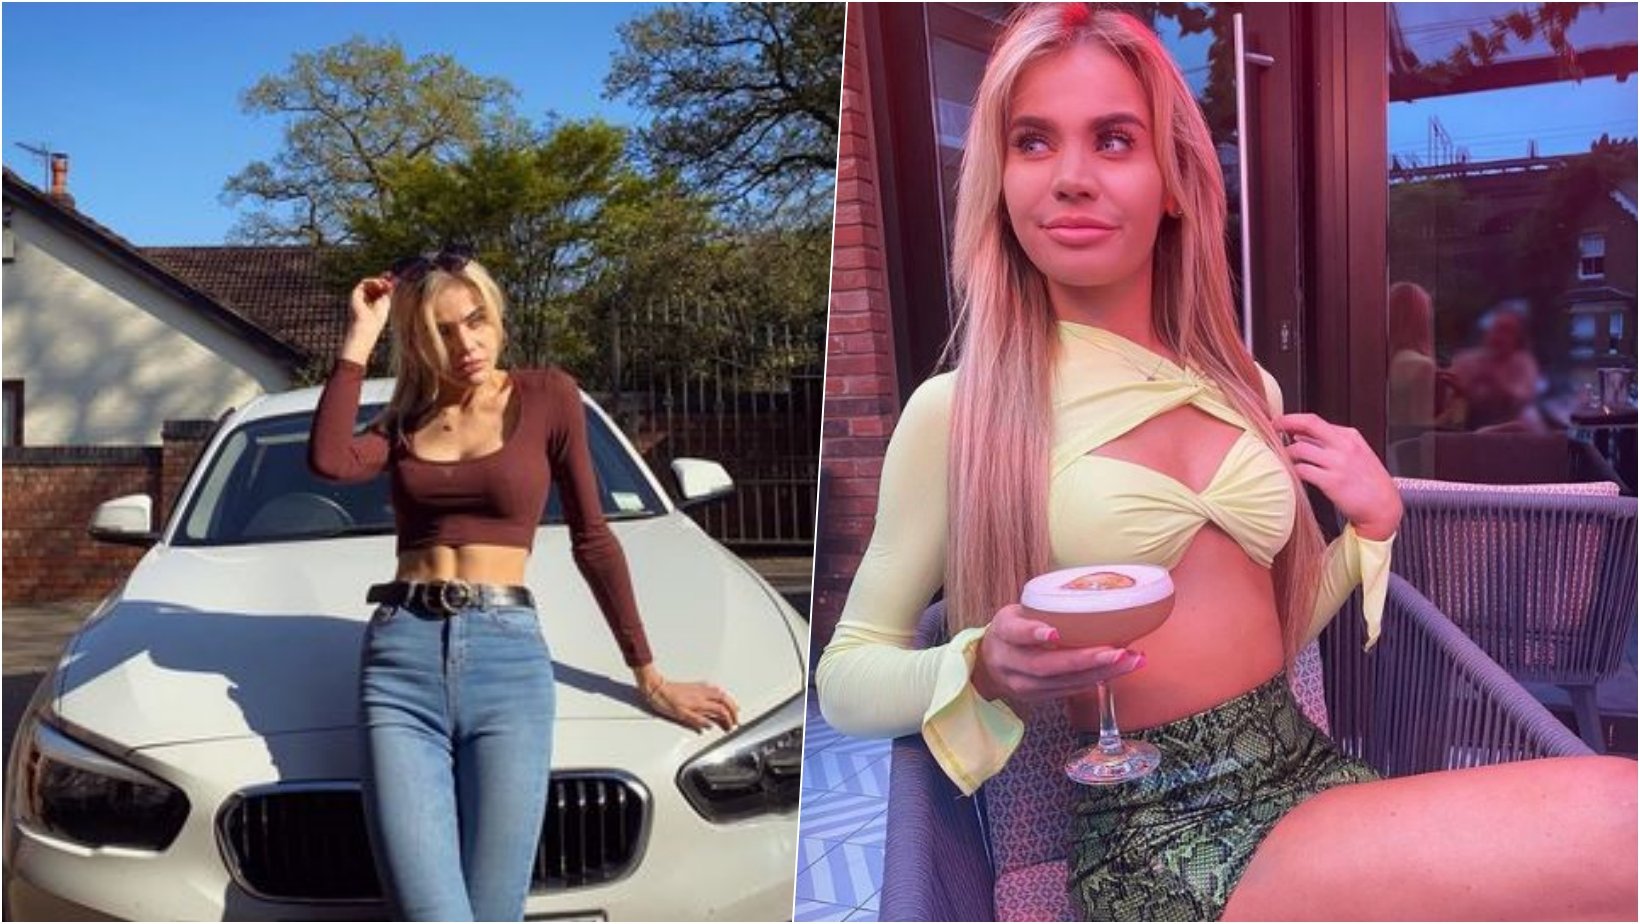 6 facebook cover 10.jpg?resize=1200,630 - Socialite Caught Drunk-Driving Begs Judge Not To Ban Her License, Saying She Doesn’t Want To Use Public Transport